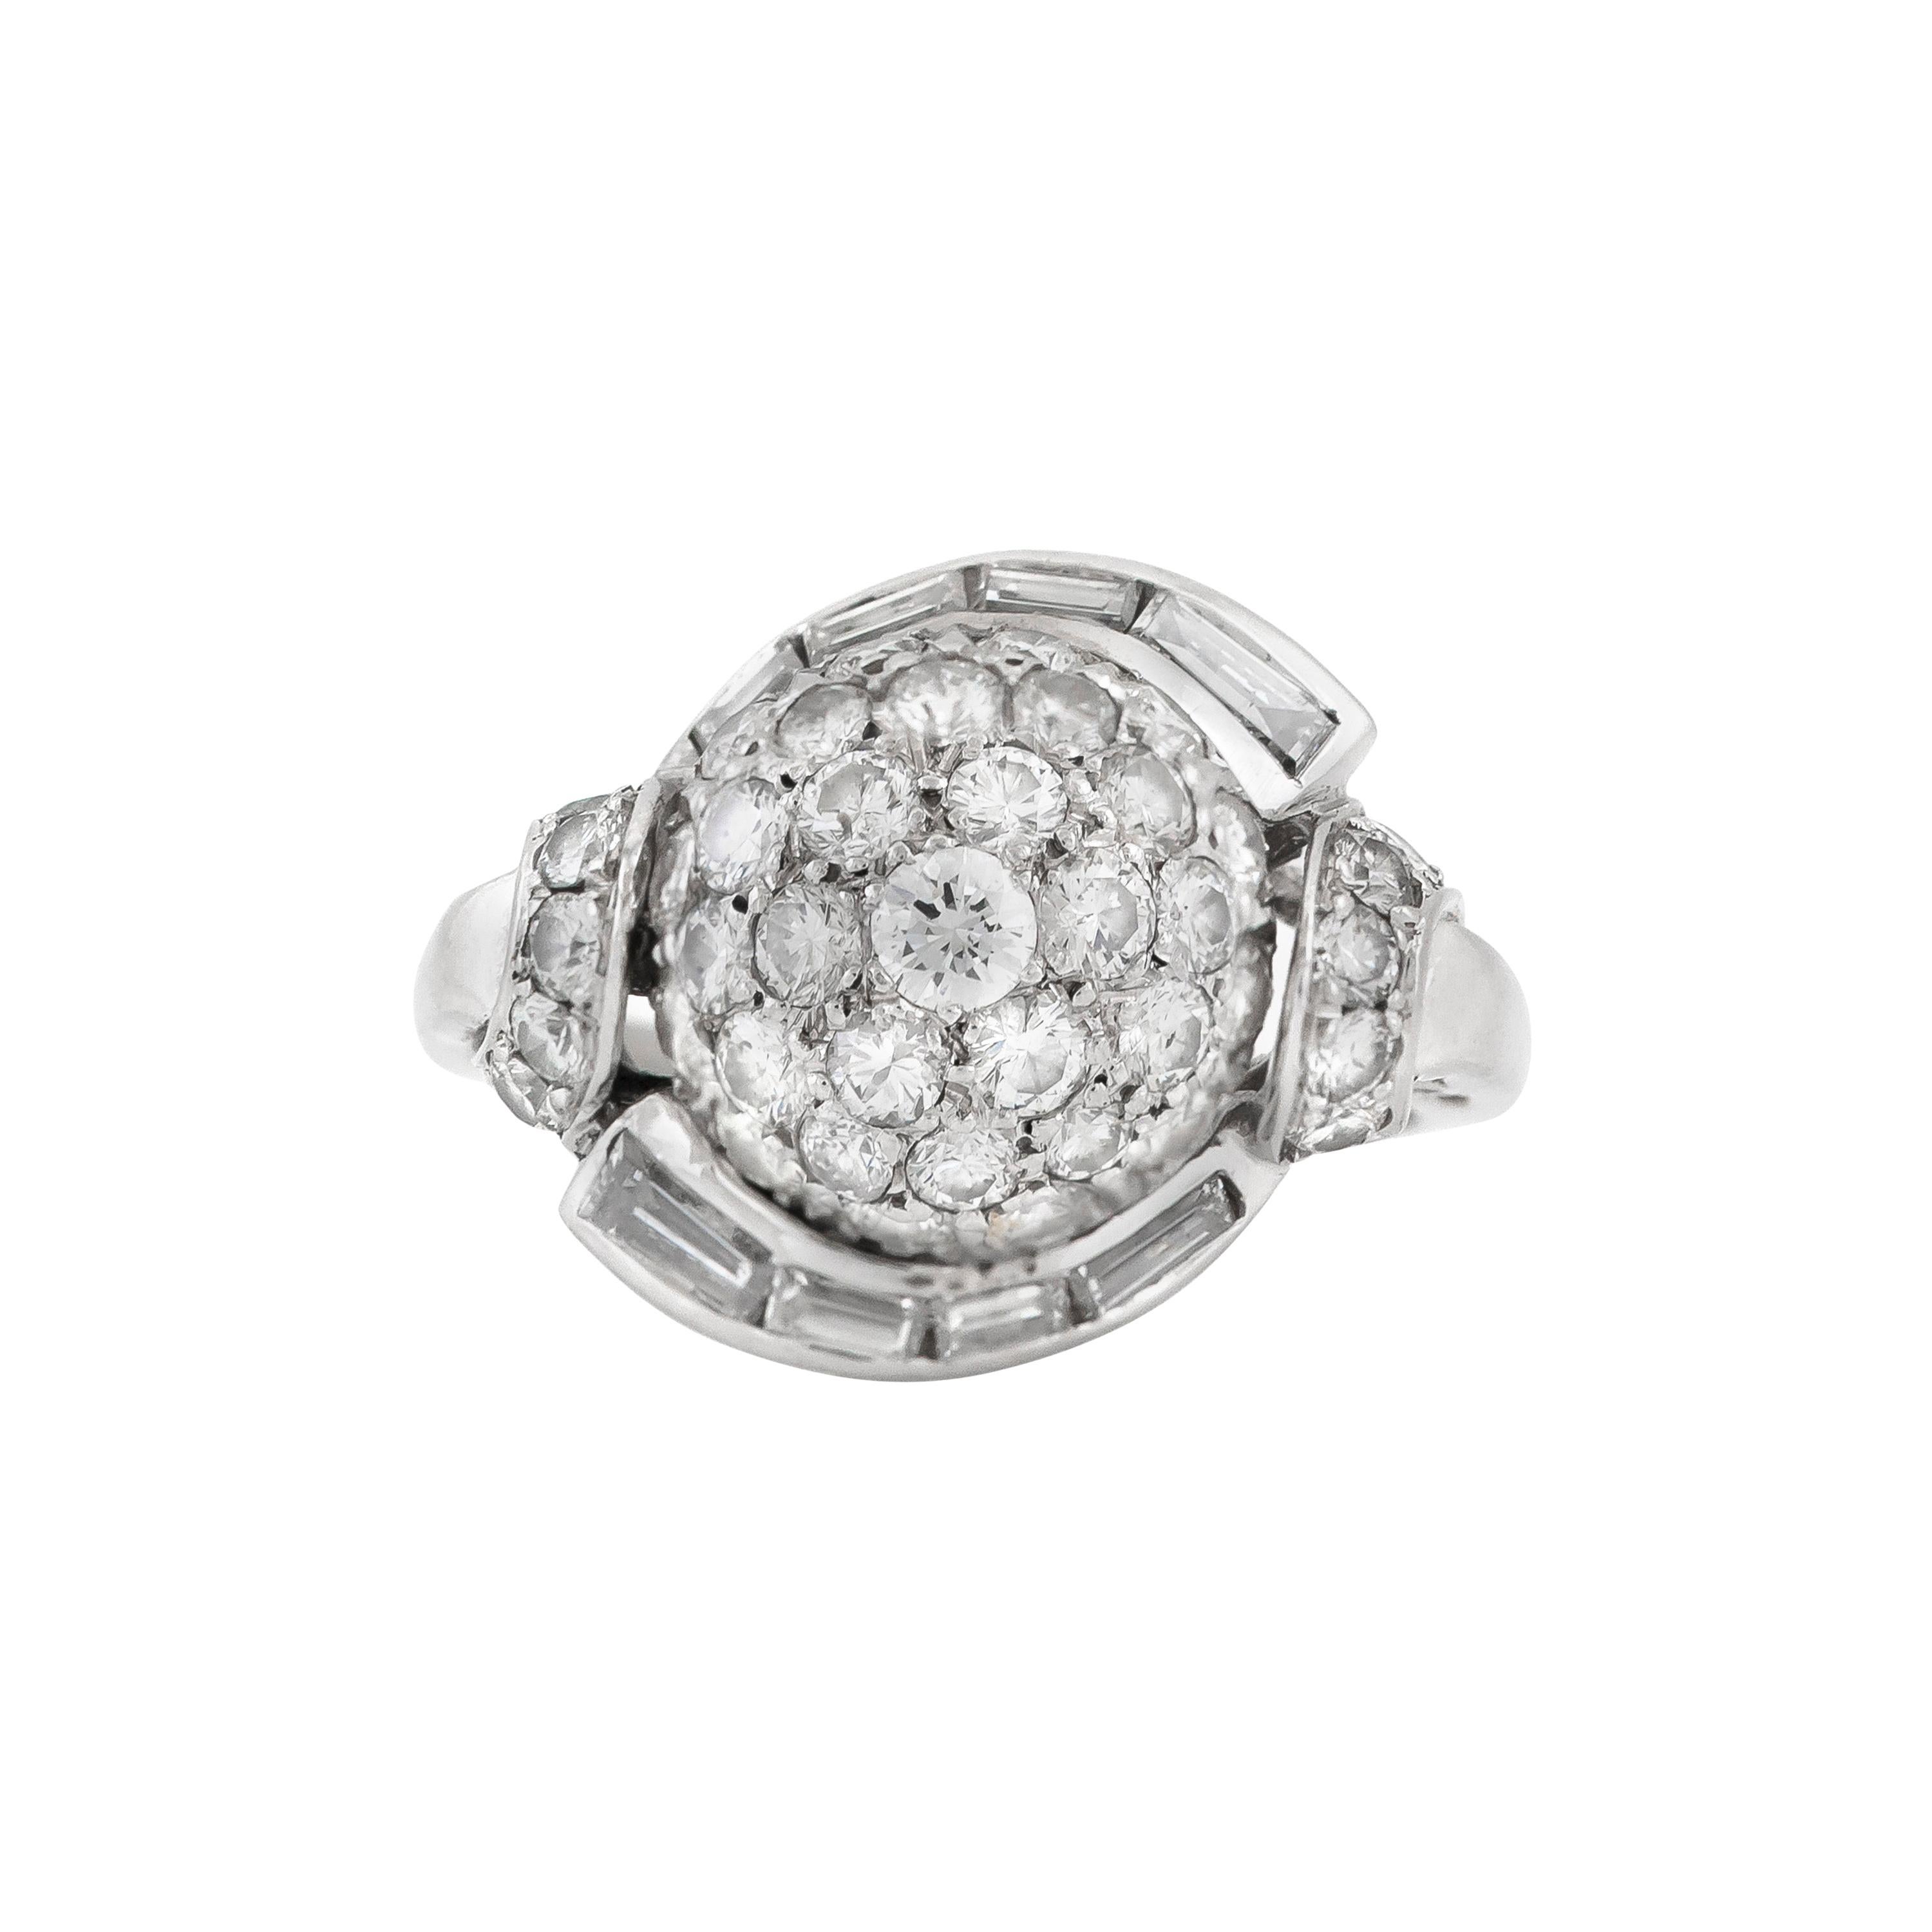 Crystal Ball Design with Round and Baguette Diamond For Sale